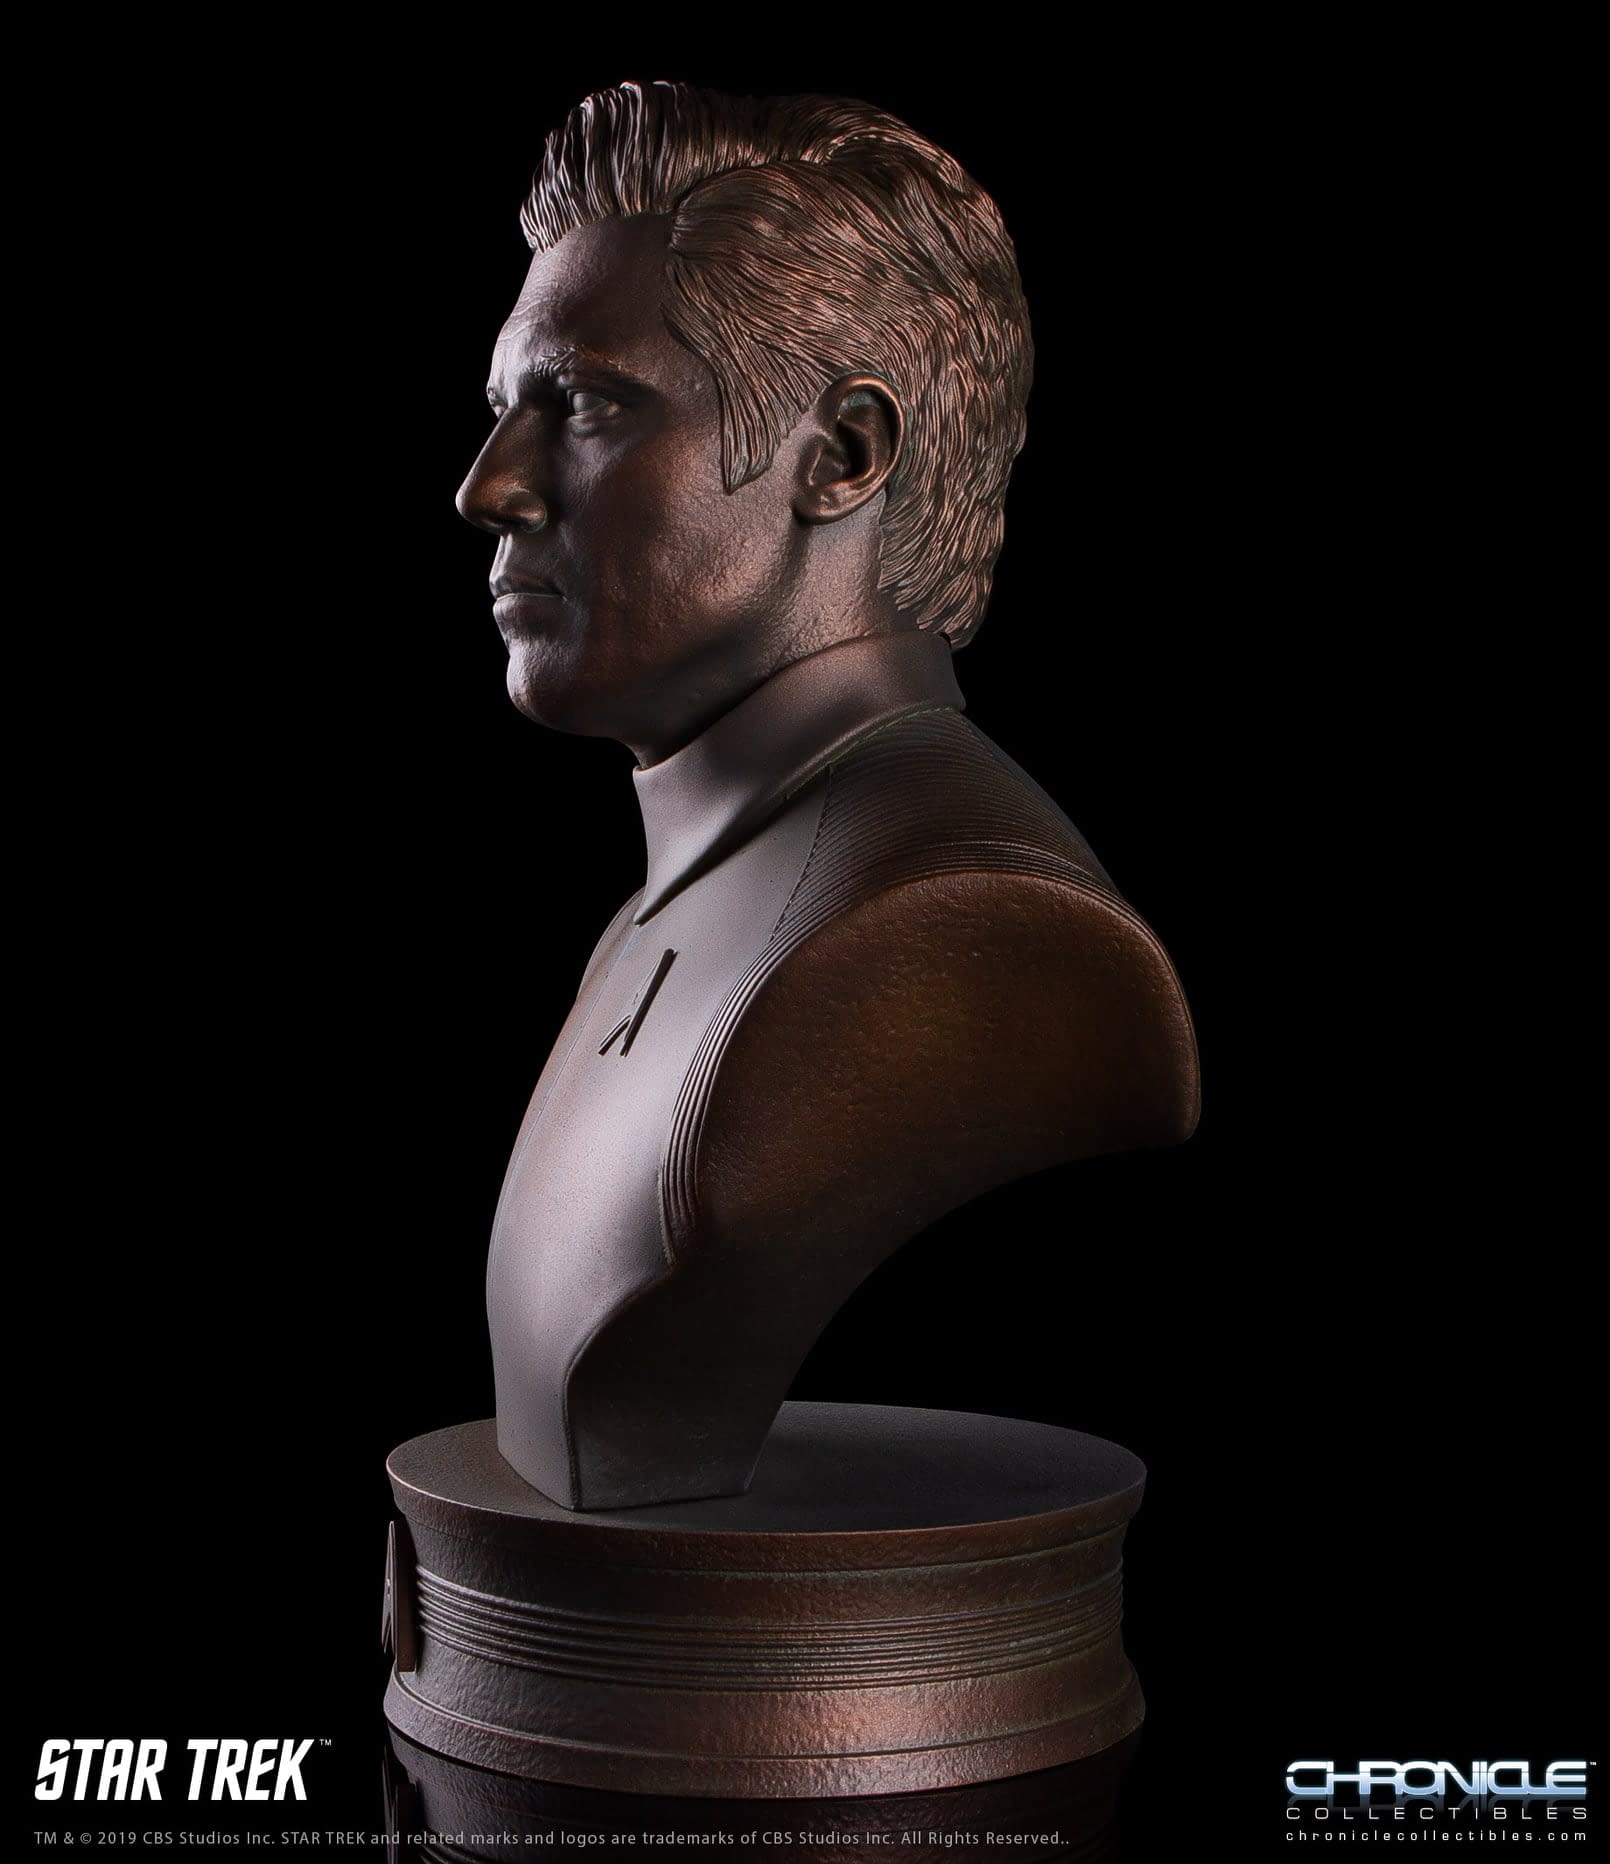 Star Trek Busts Are Here for You to Discover